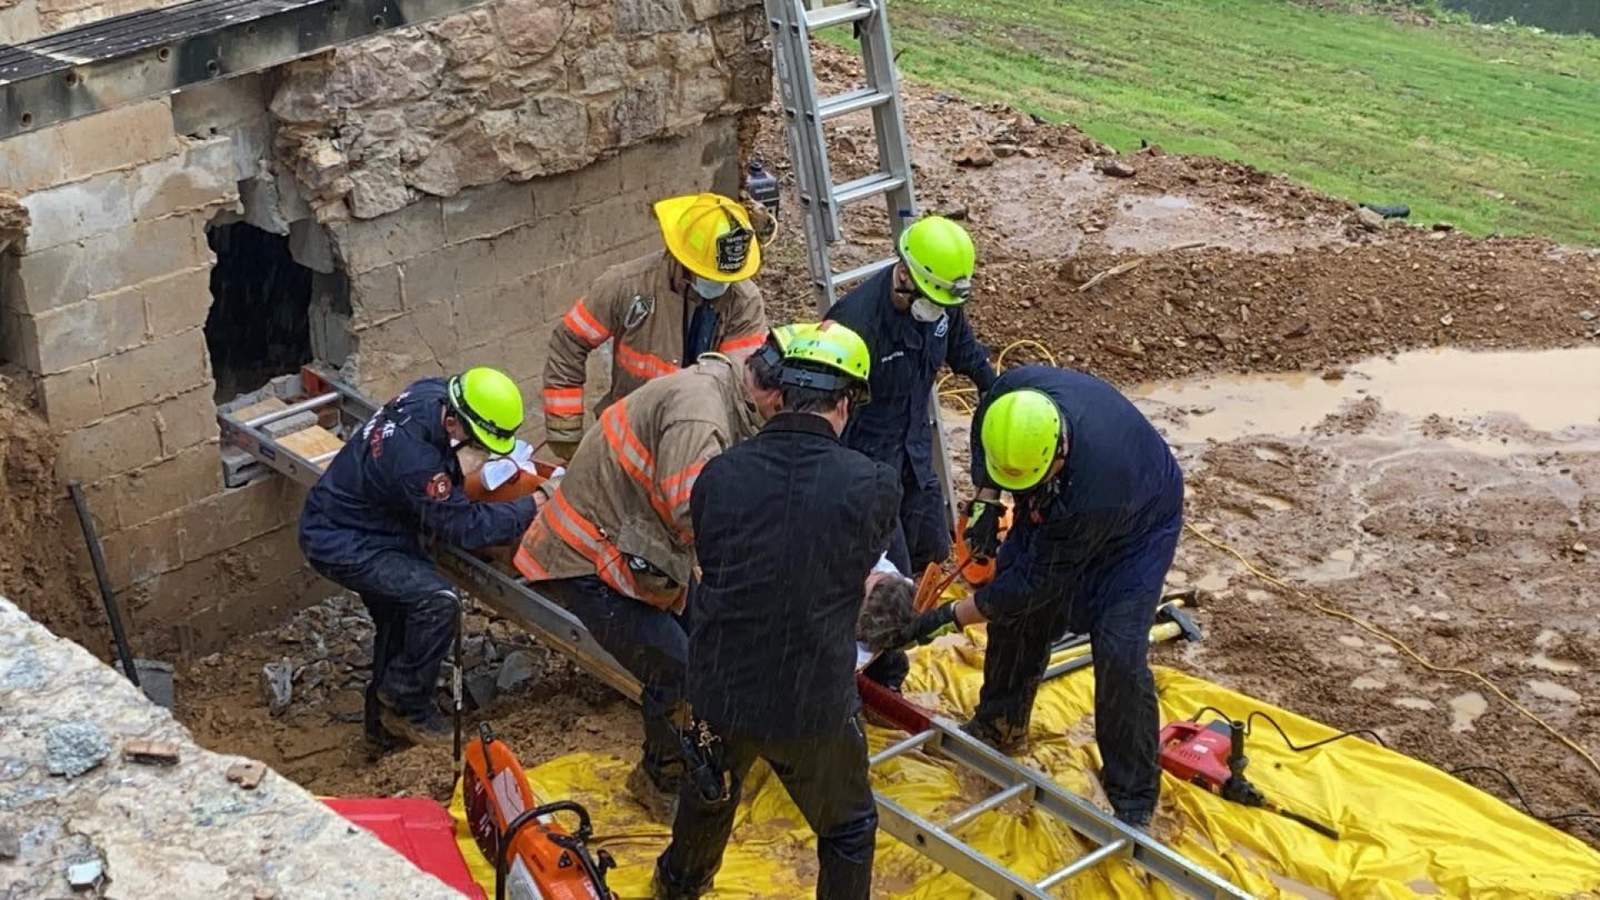 Roanoke rescue crew cuts through concrete wall to rescue construction worker